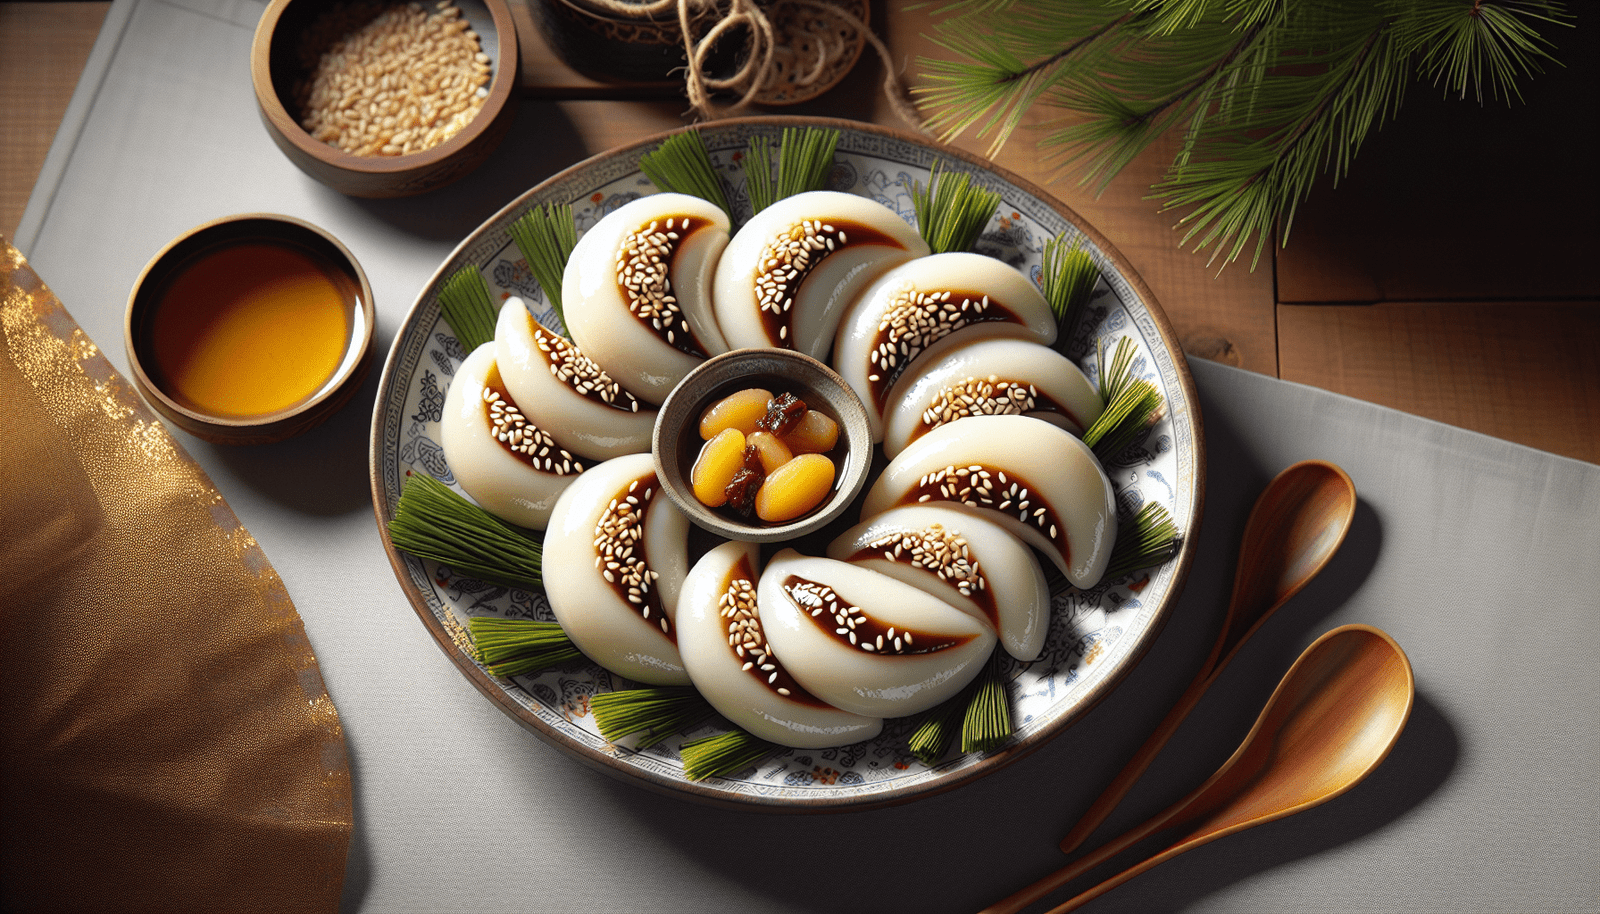 Can You Explain The Cultural Significance Of Traditional Korean Holiday Dishes?